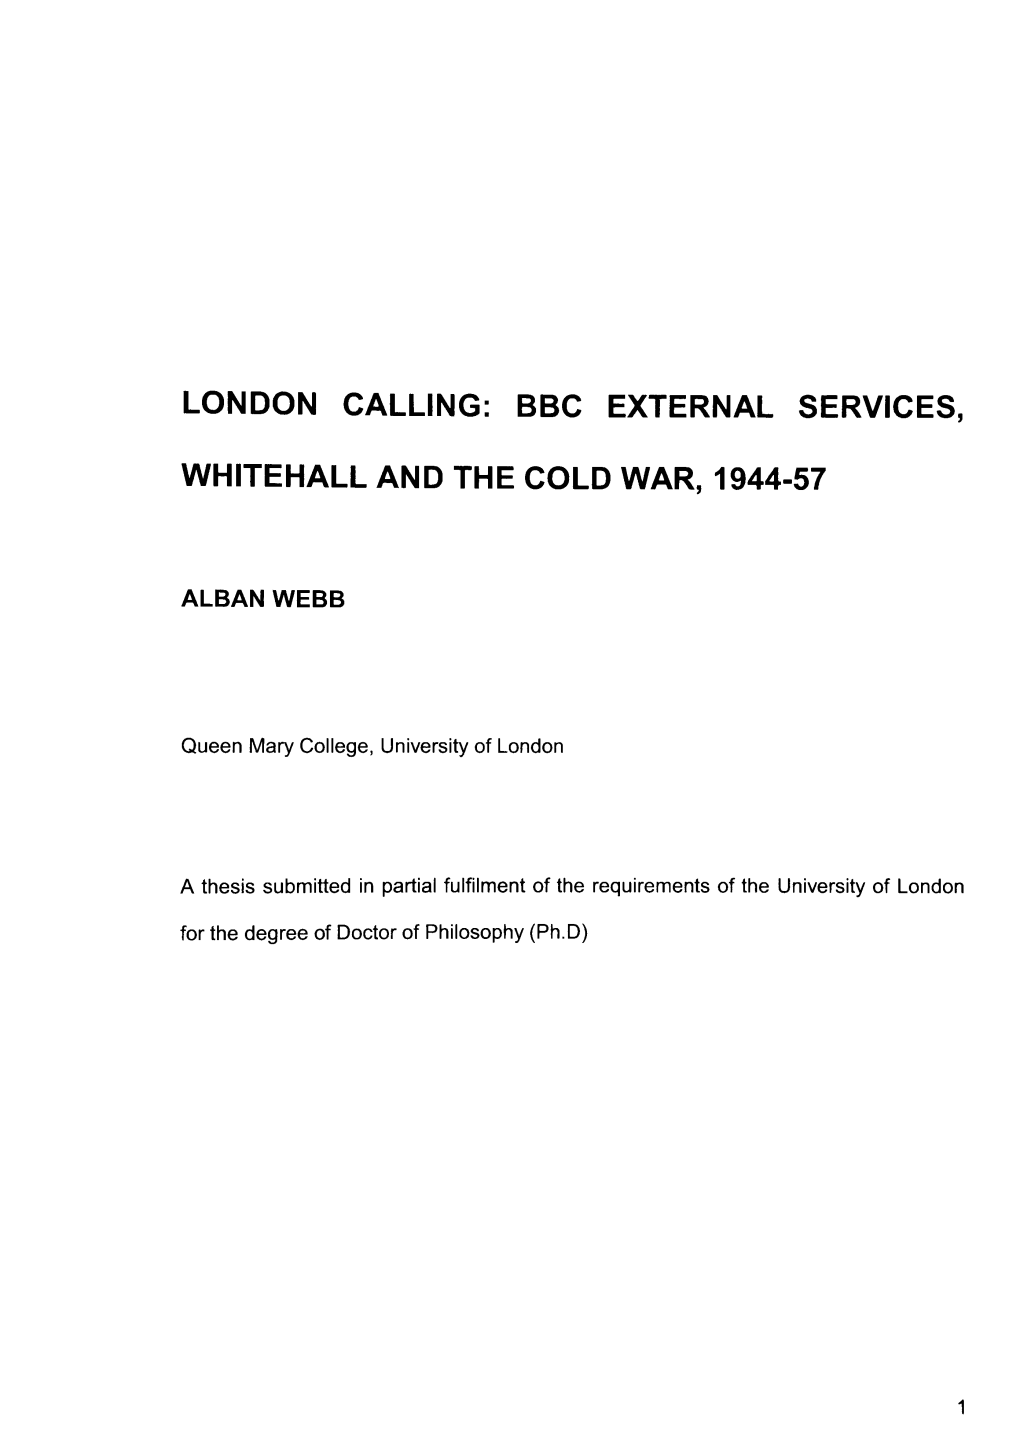 London Calling: Ssc External Services, Whitehall and The